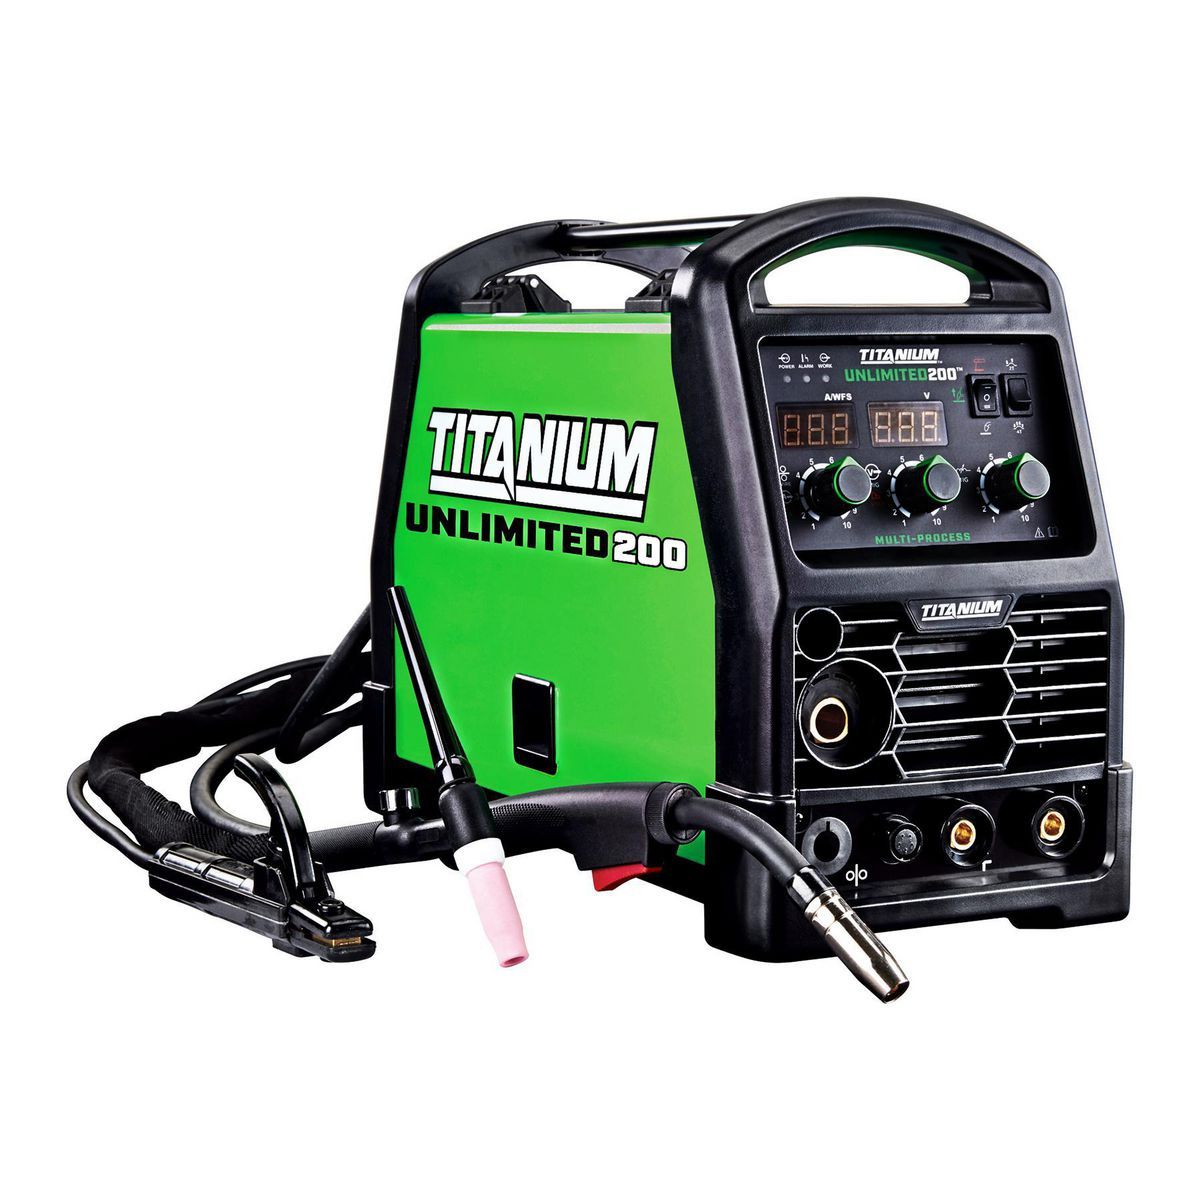 TITANIUM UNLIMITED 200 Professional Multiprocess Welder with 120/240V Input